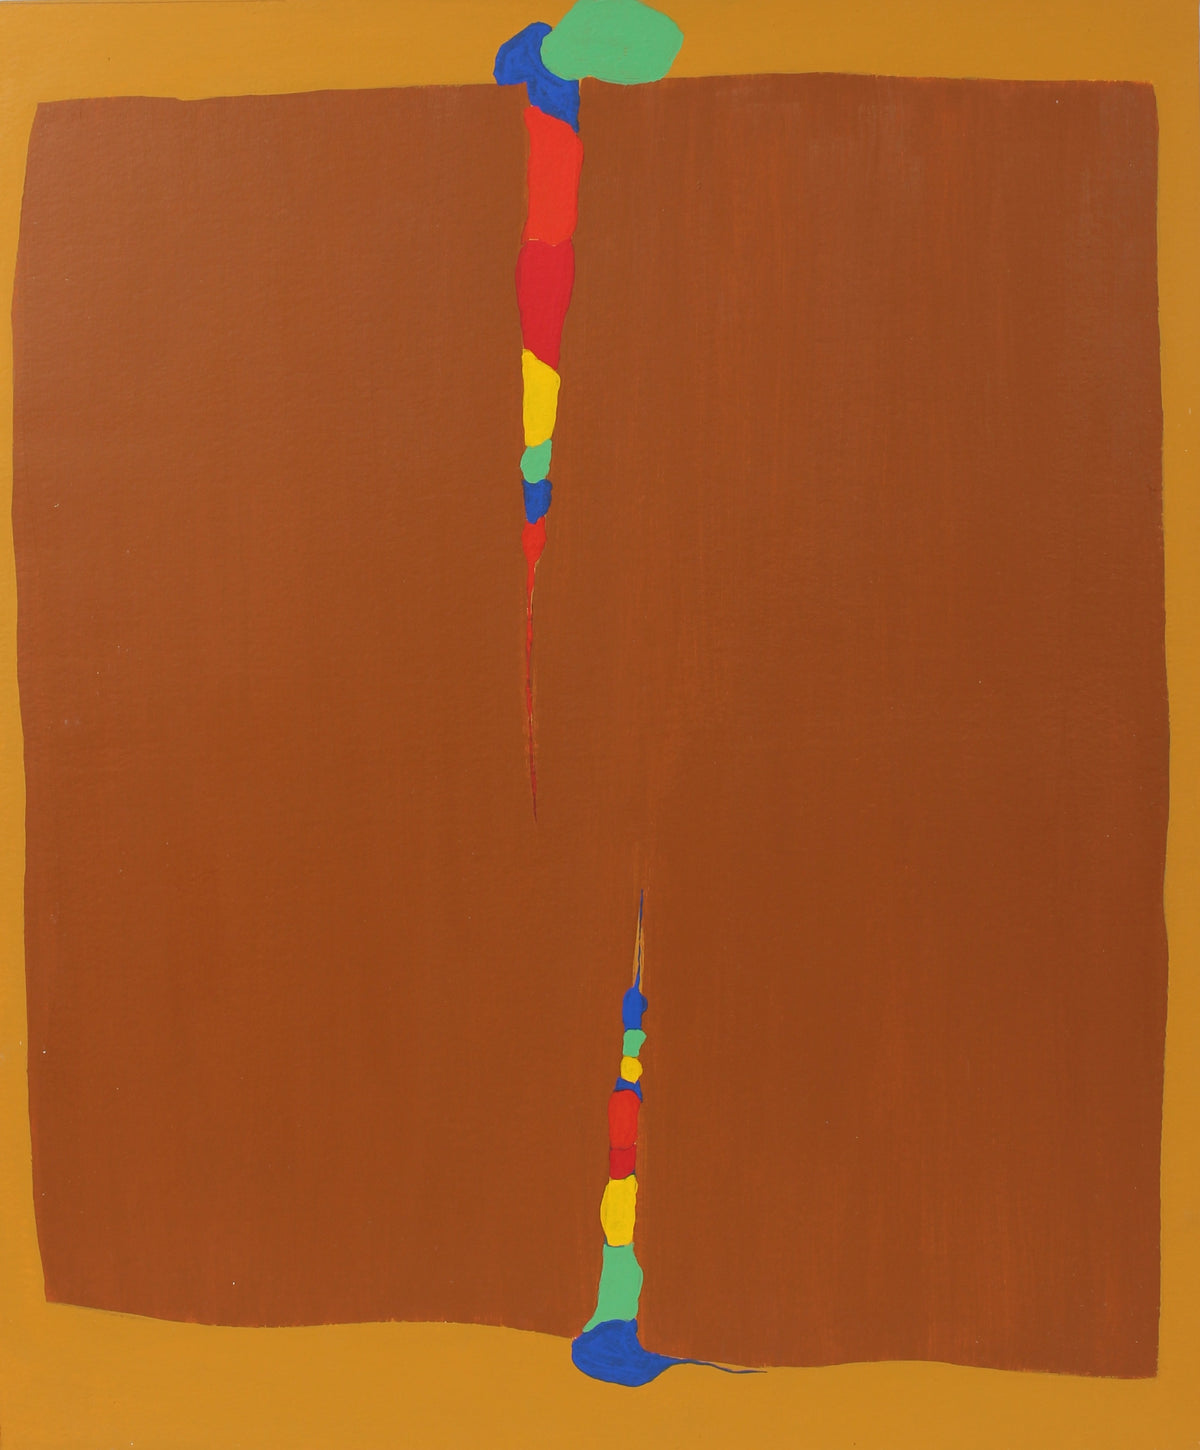 Warm Abstract in Brown Tones&lt;br&gt;Mid-Late 20th Century Acrylic&lt;br&gt;&lt;br&gt;#98175